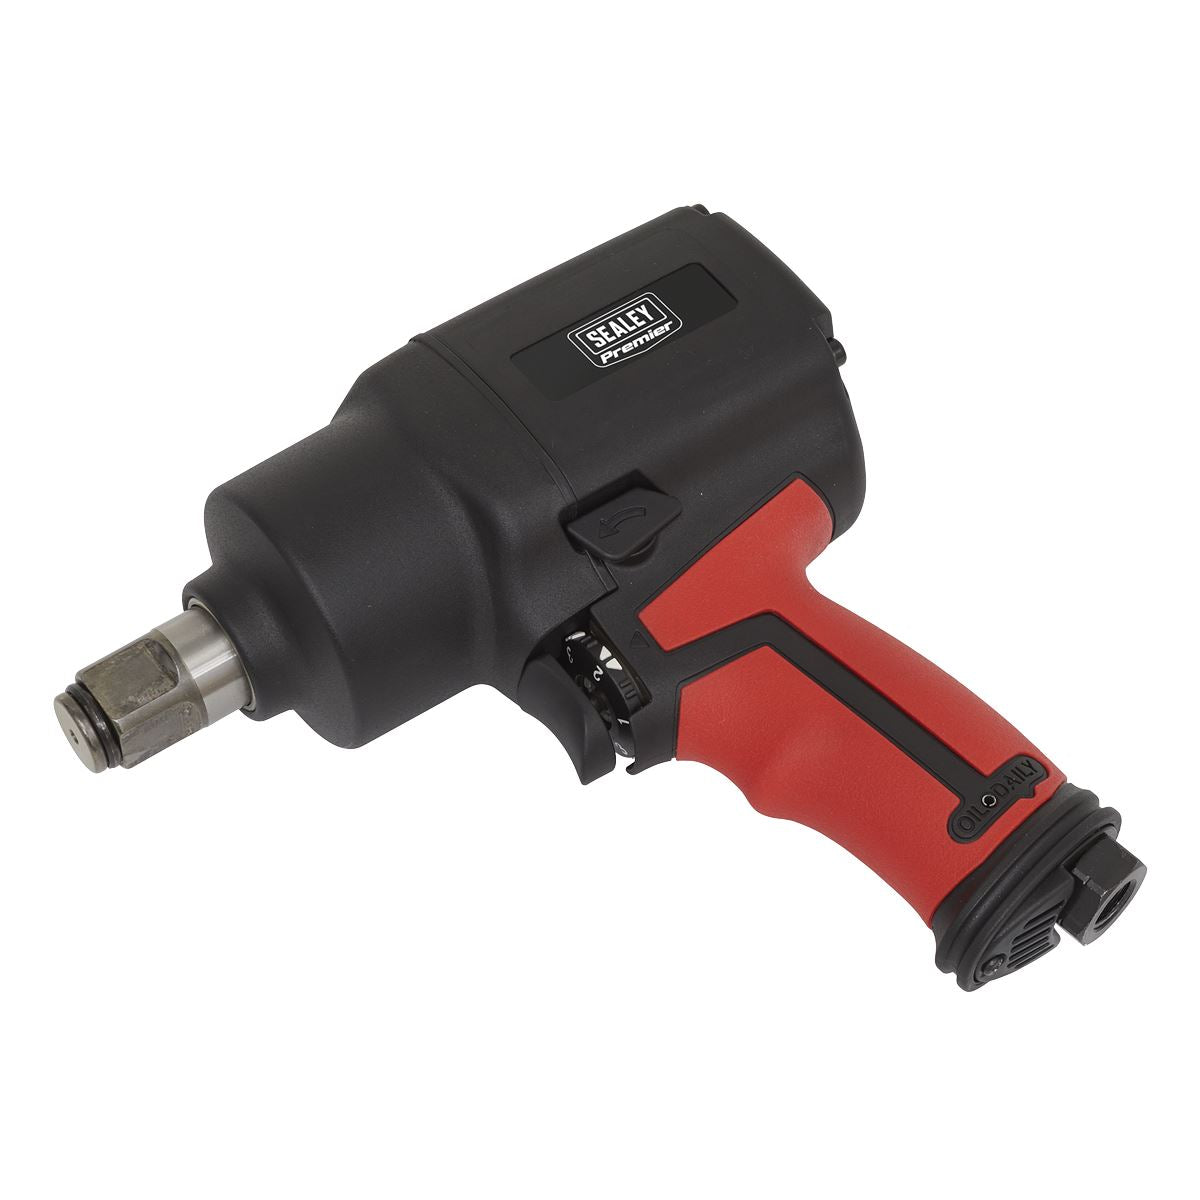 Sealey Premier Air Impact Wrench 3/4"Sq Drive Compact Twin Hammer